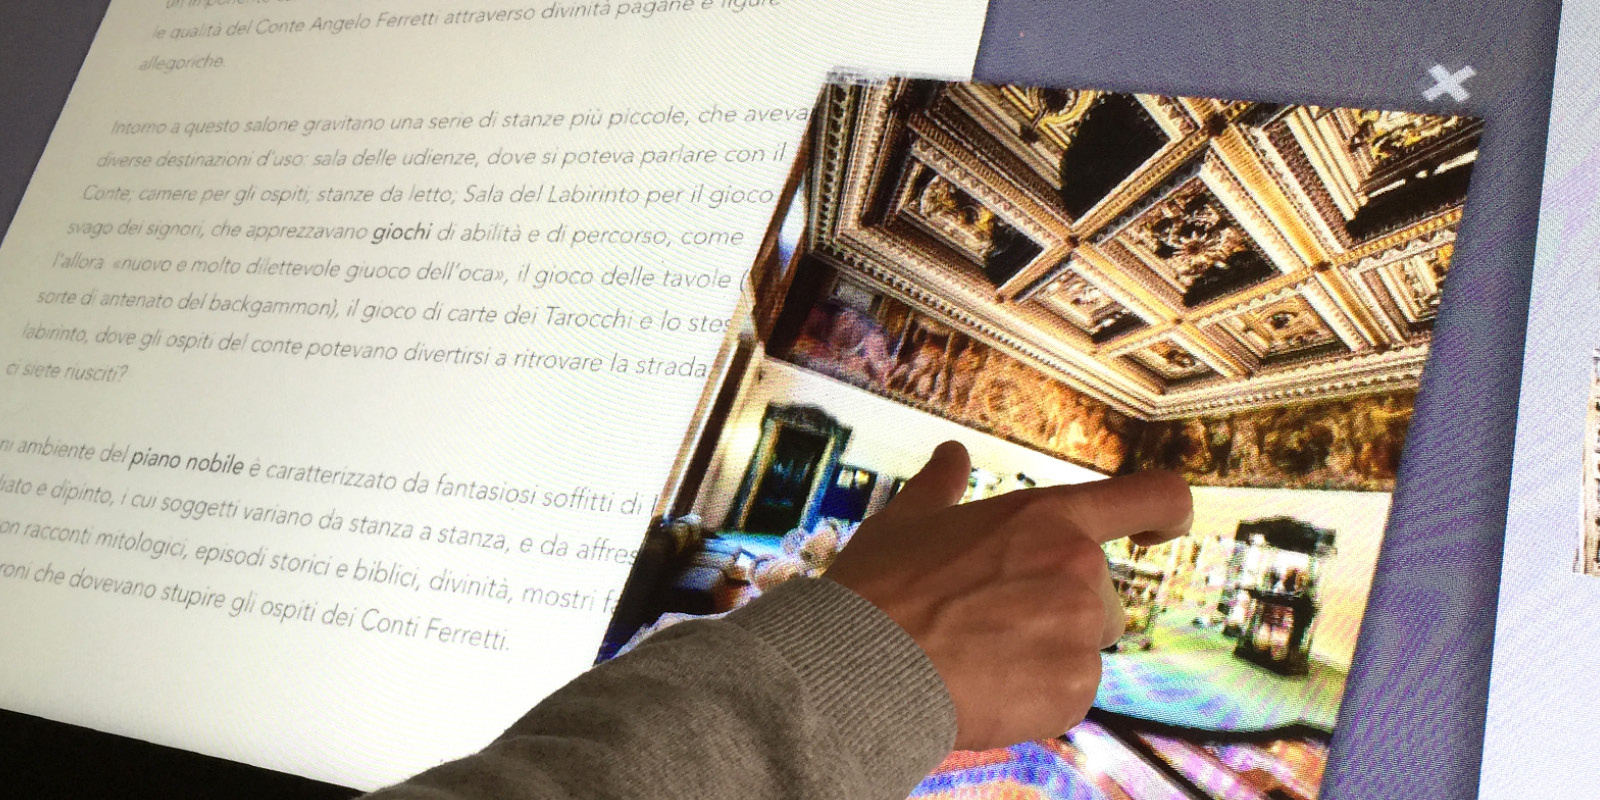 Touchwindow - The Museum experience becomes interactive!